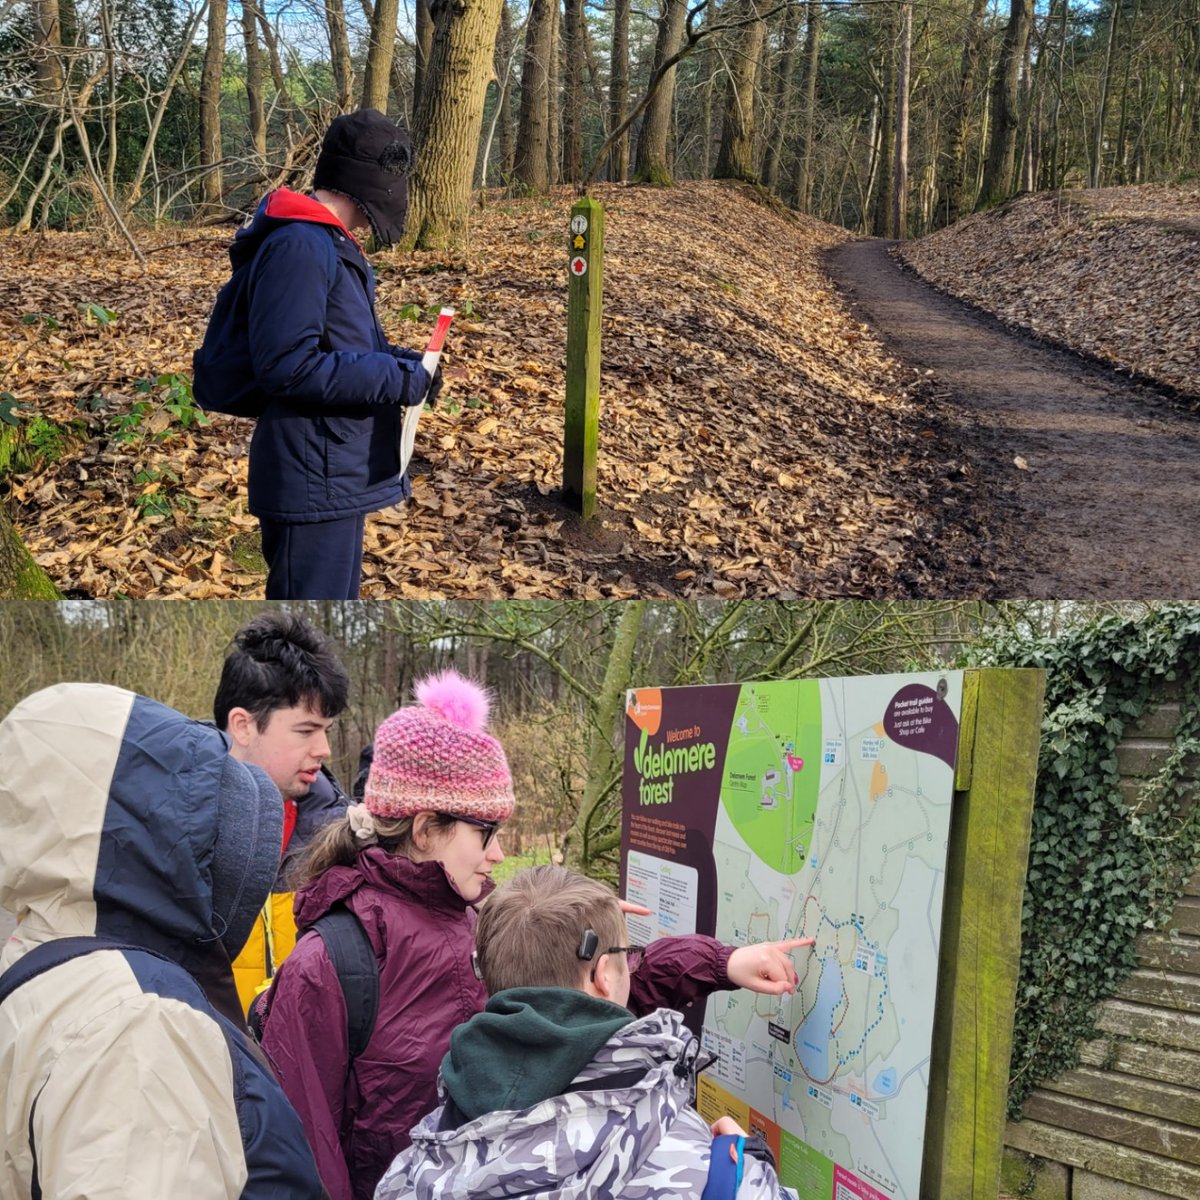 Another lovely training walk yesterday around Delamere for Bronze @DofE group! Some brilliant map reading again from everyone! @SteveE_Derwen @DerwenCollege @DofECentral